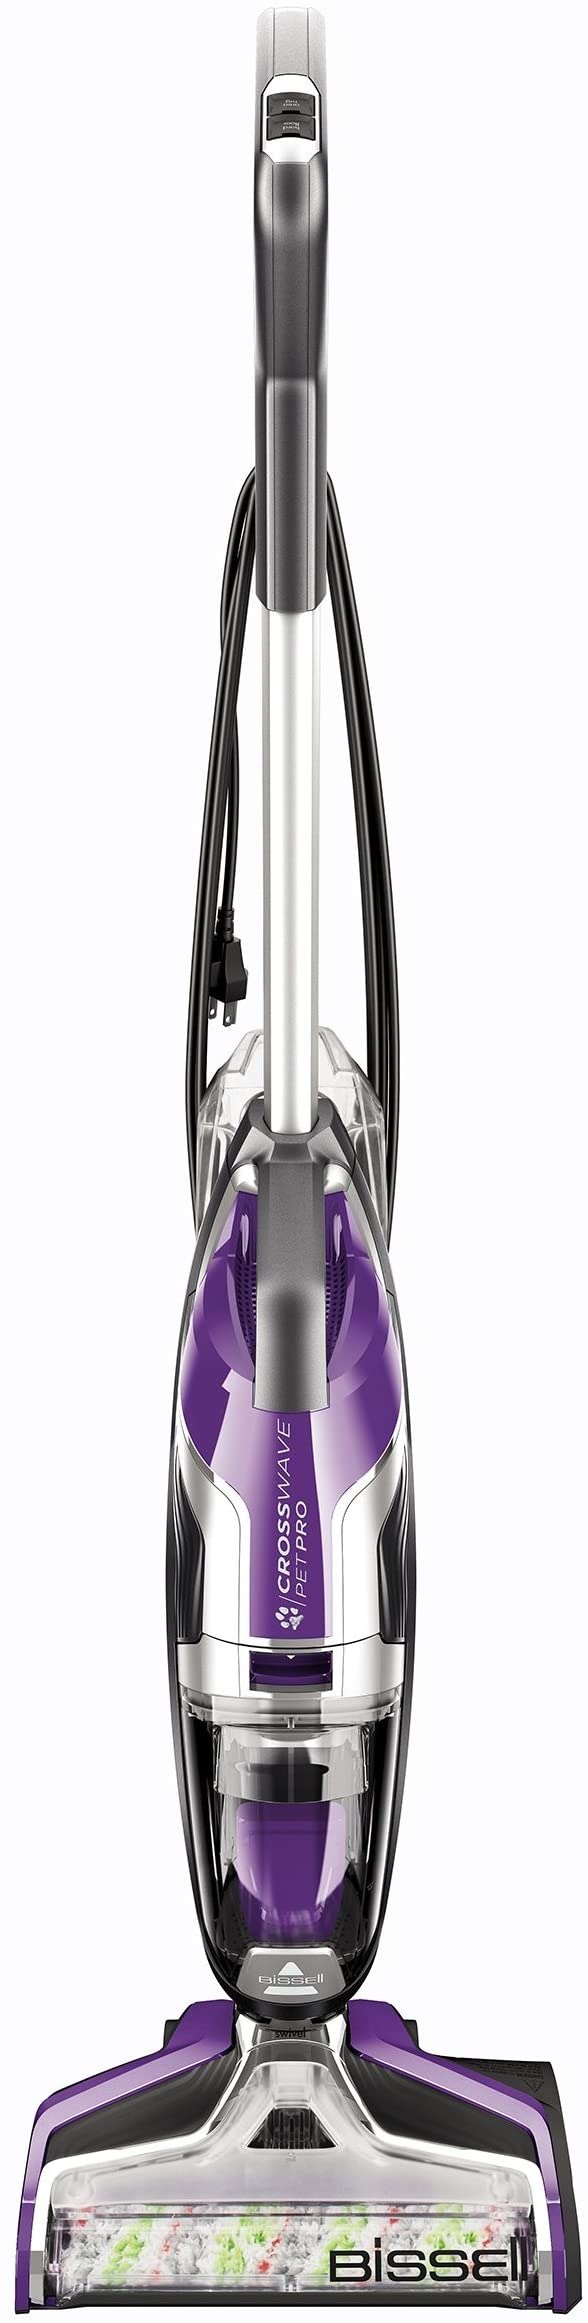 2225F Crosswave Pet All in One Wet Dry Vacuum Cleaner and Mop for Hard Floors and Area Rugs, Grapevine Purple